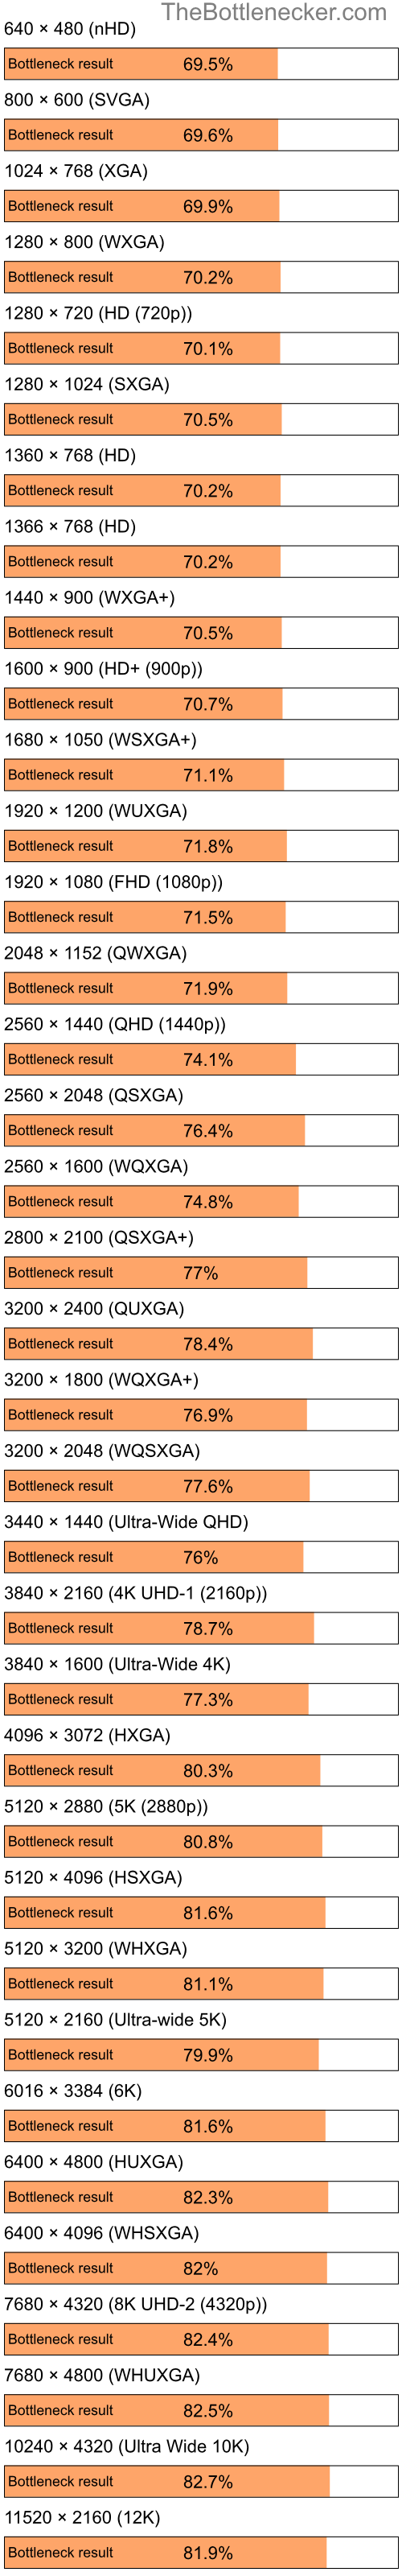 Bottleneck results by resolution for Intel Celeron M 410 and NVIDIA GeForce 9400M in Graphic Card Intense Tasks